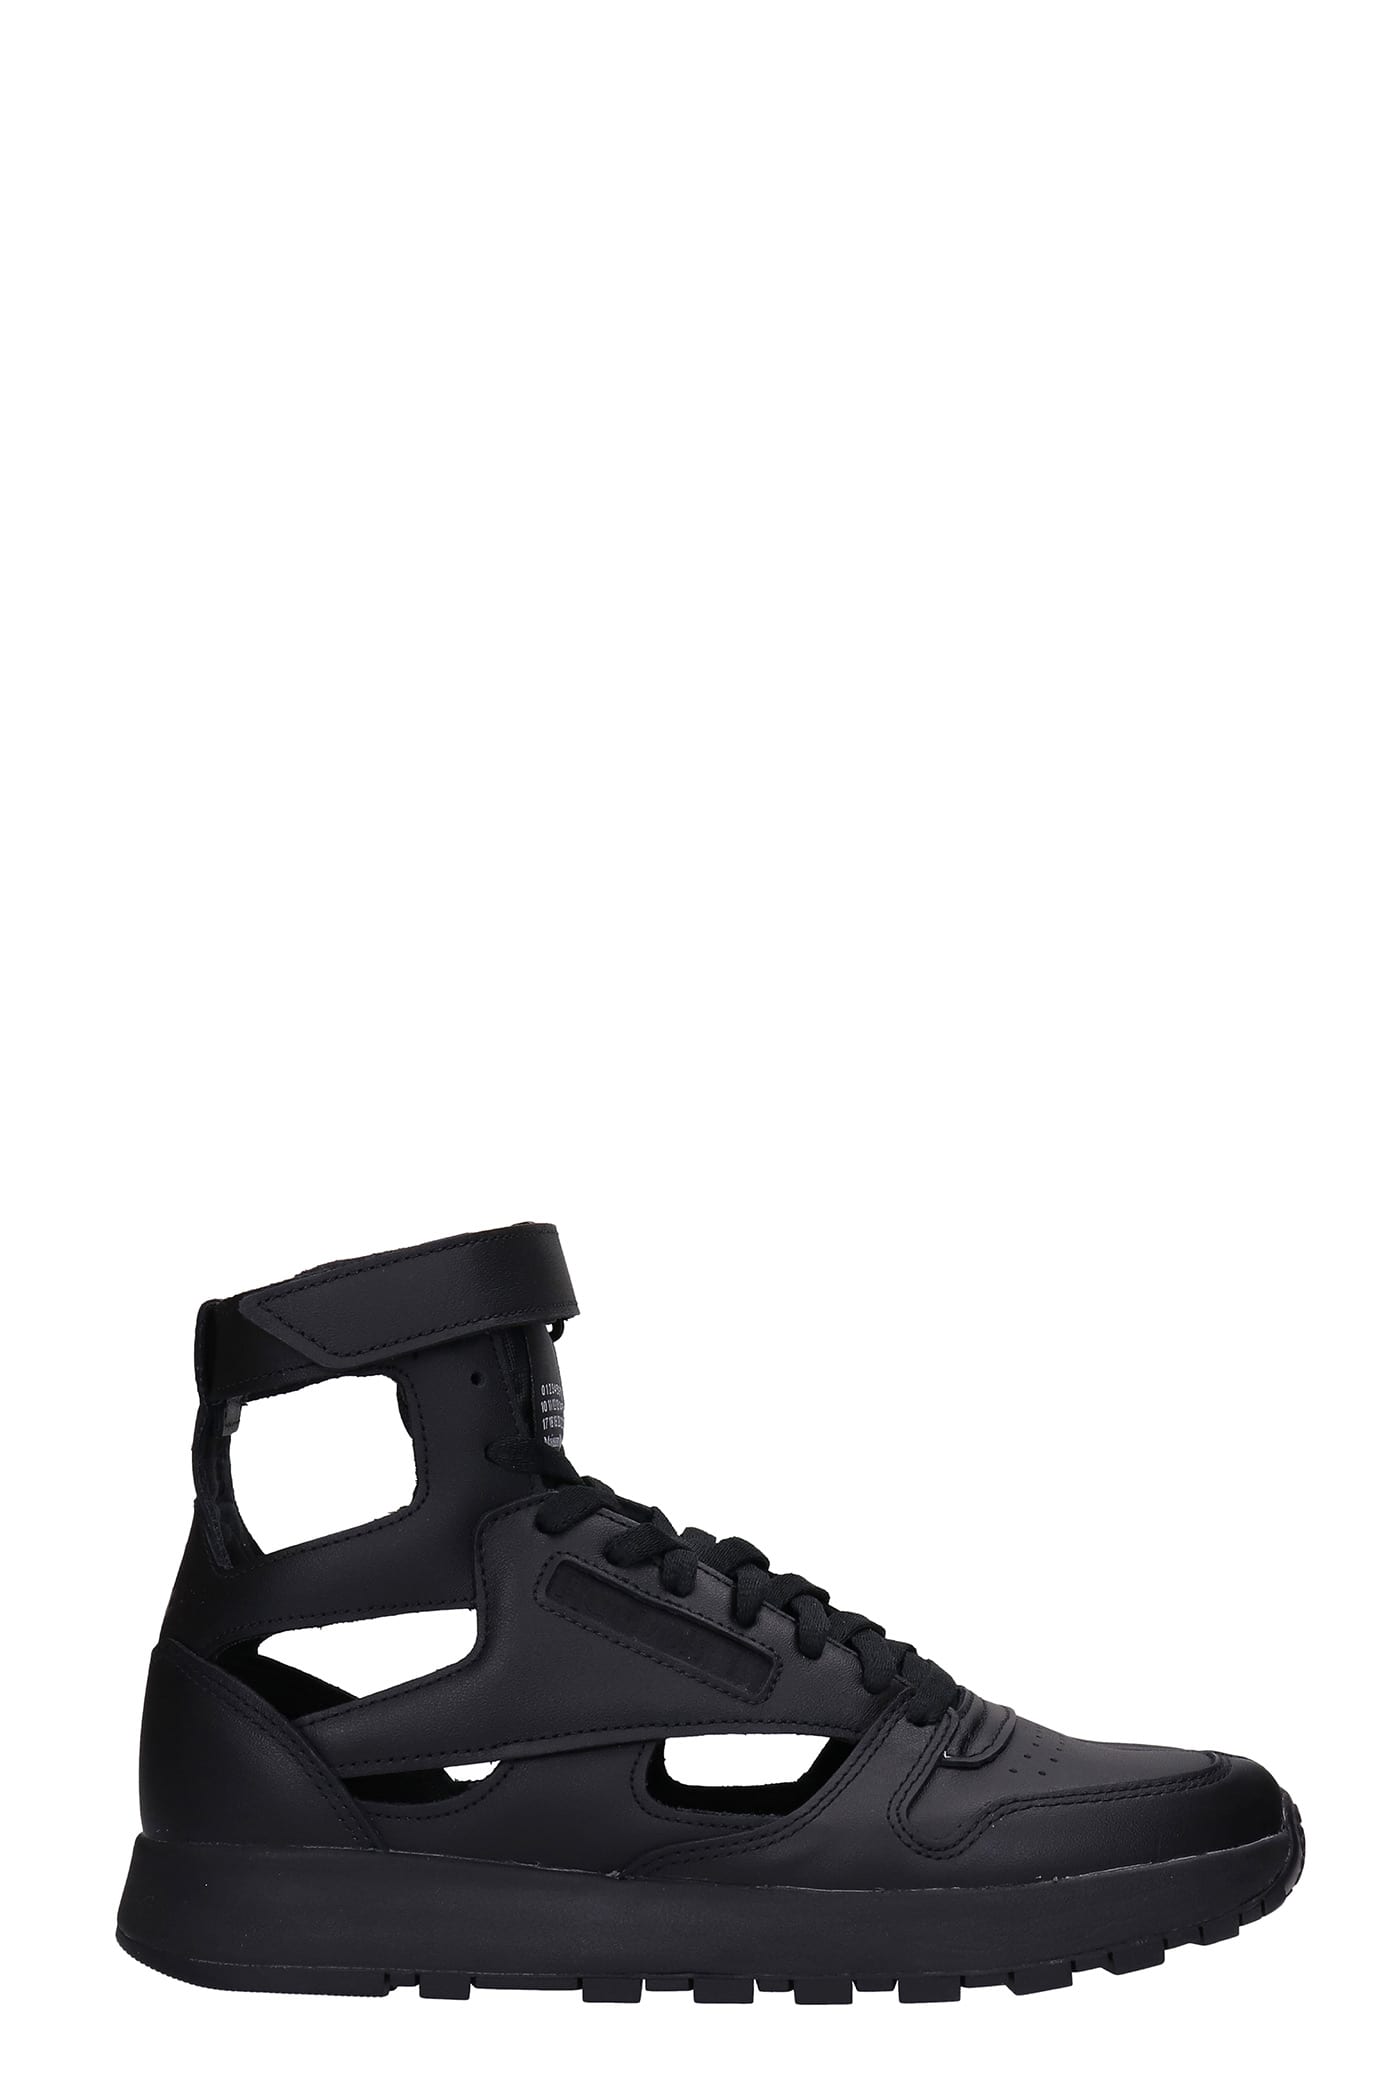 Maison Margiela Project Cl 0 Sneakers In Black Leather